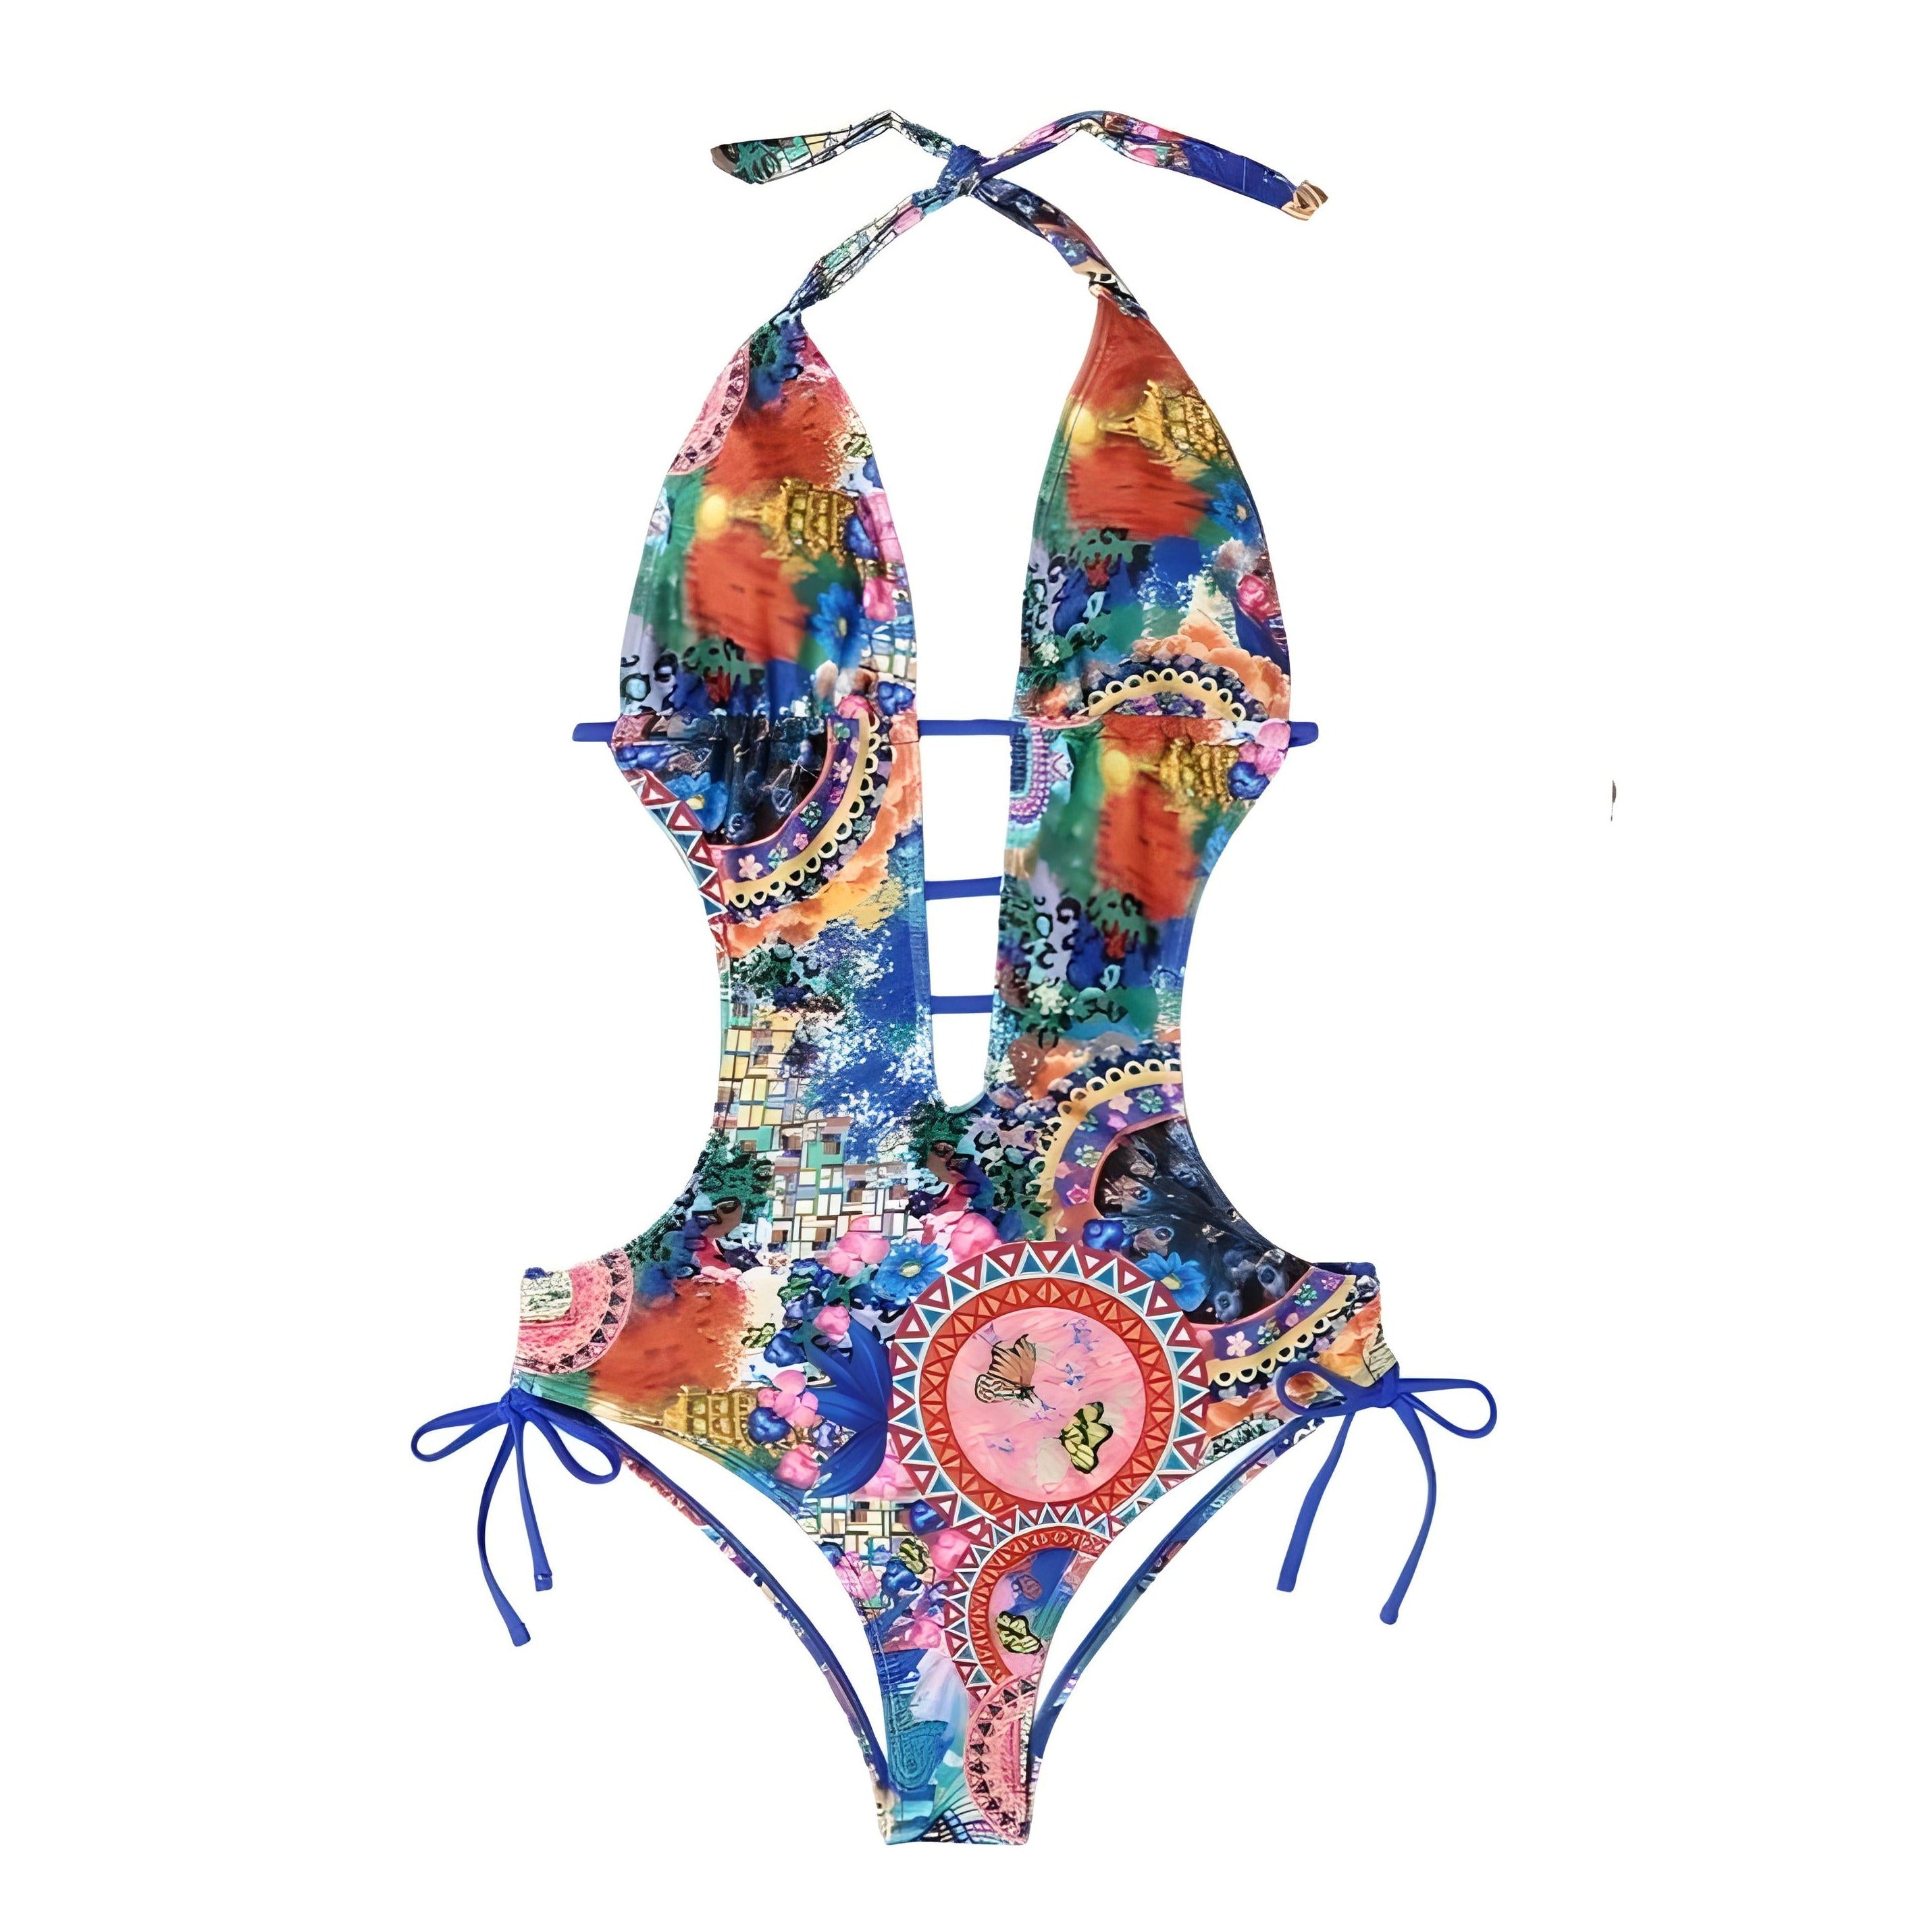 Backless Lace-Up One-Piece Swimsuit - Multicolored / S -